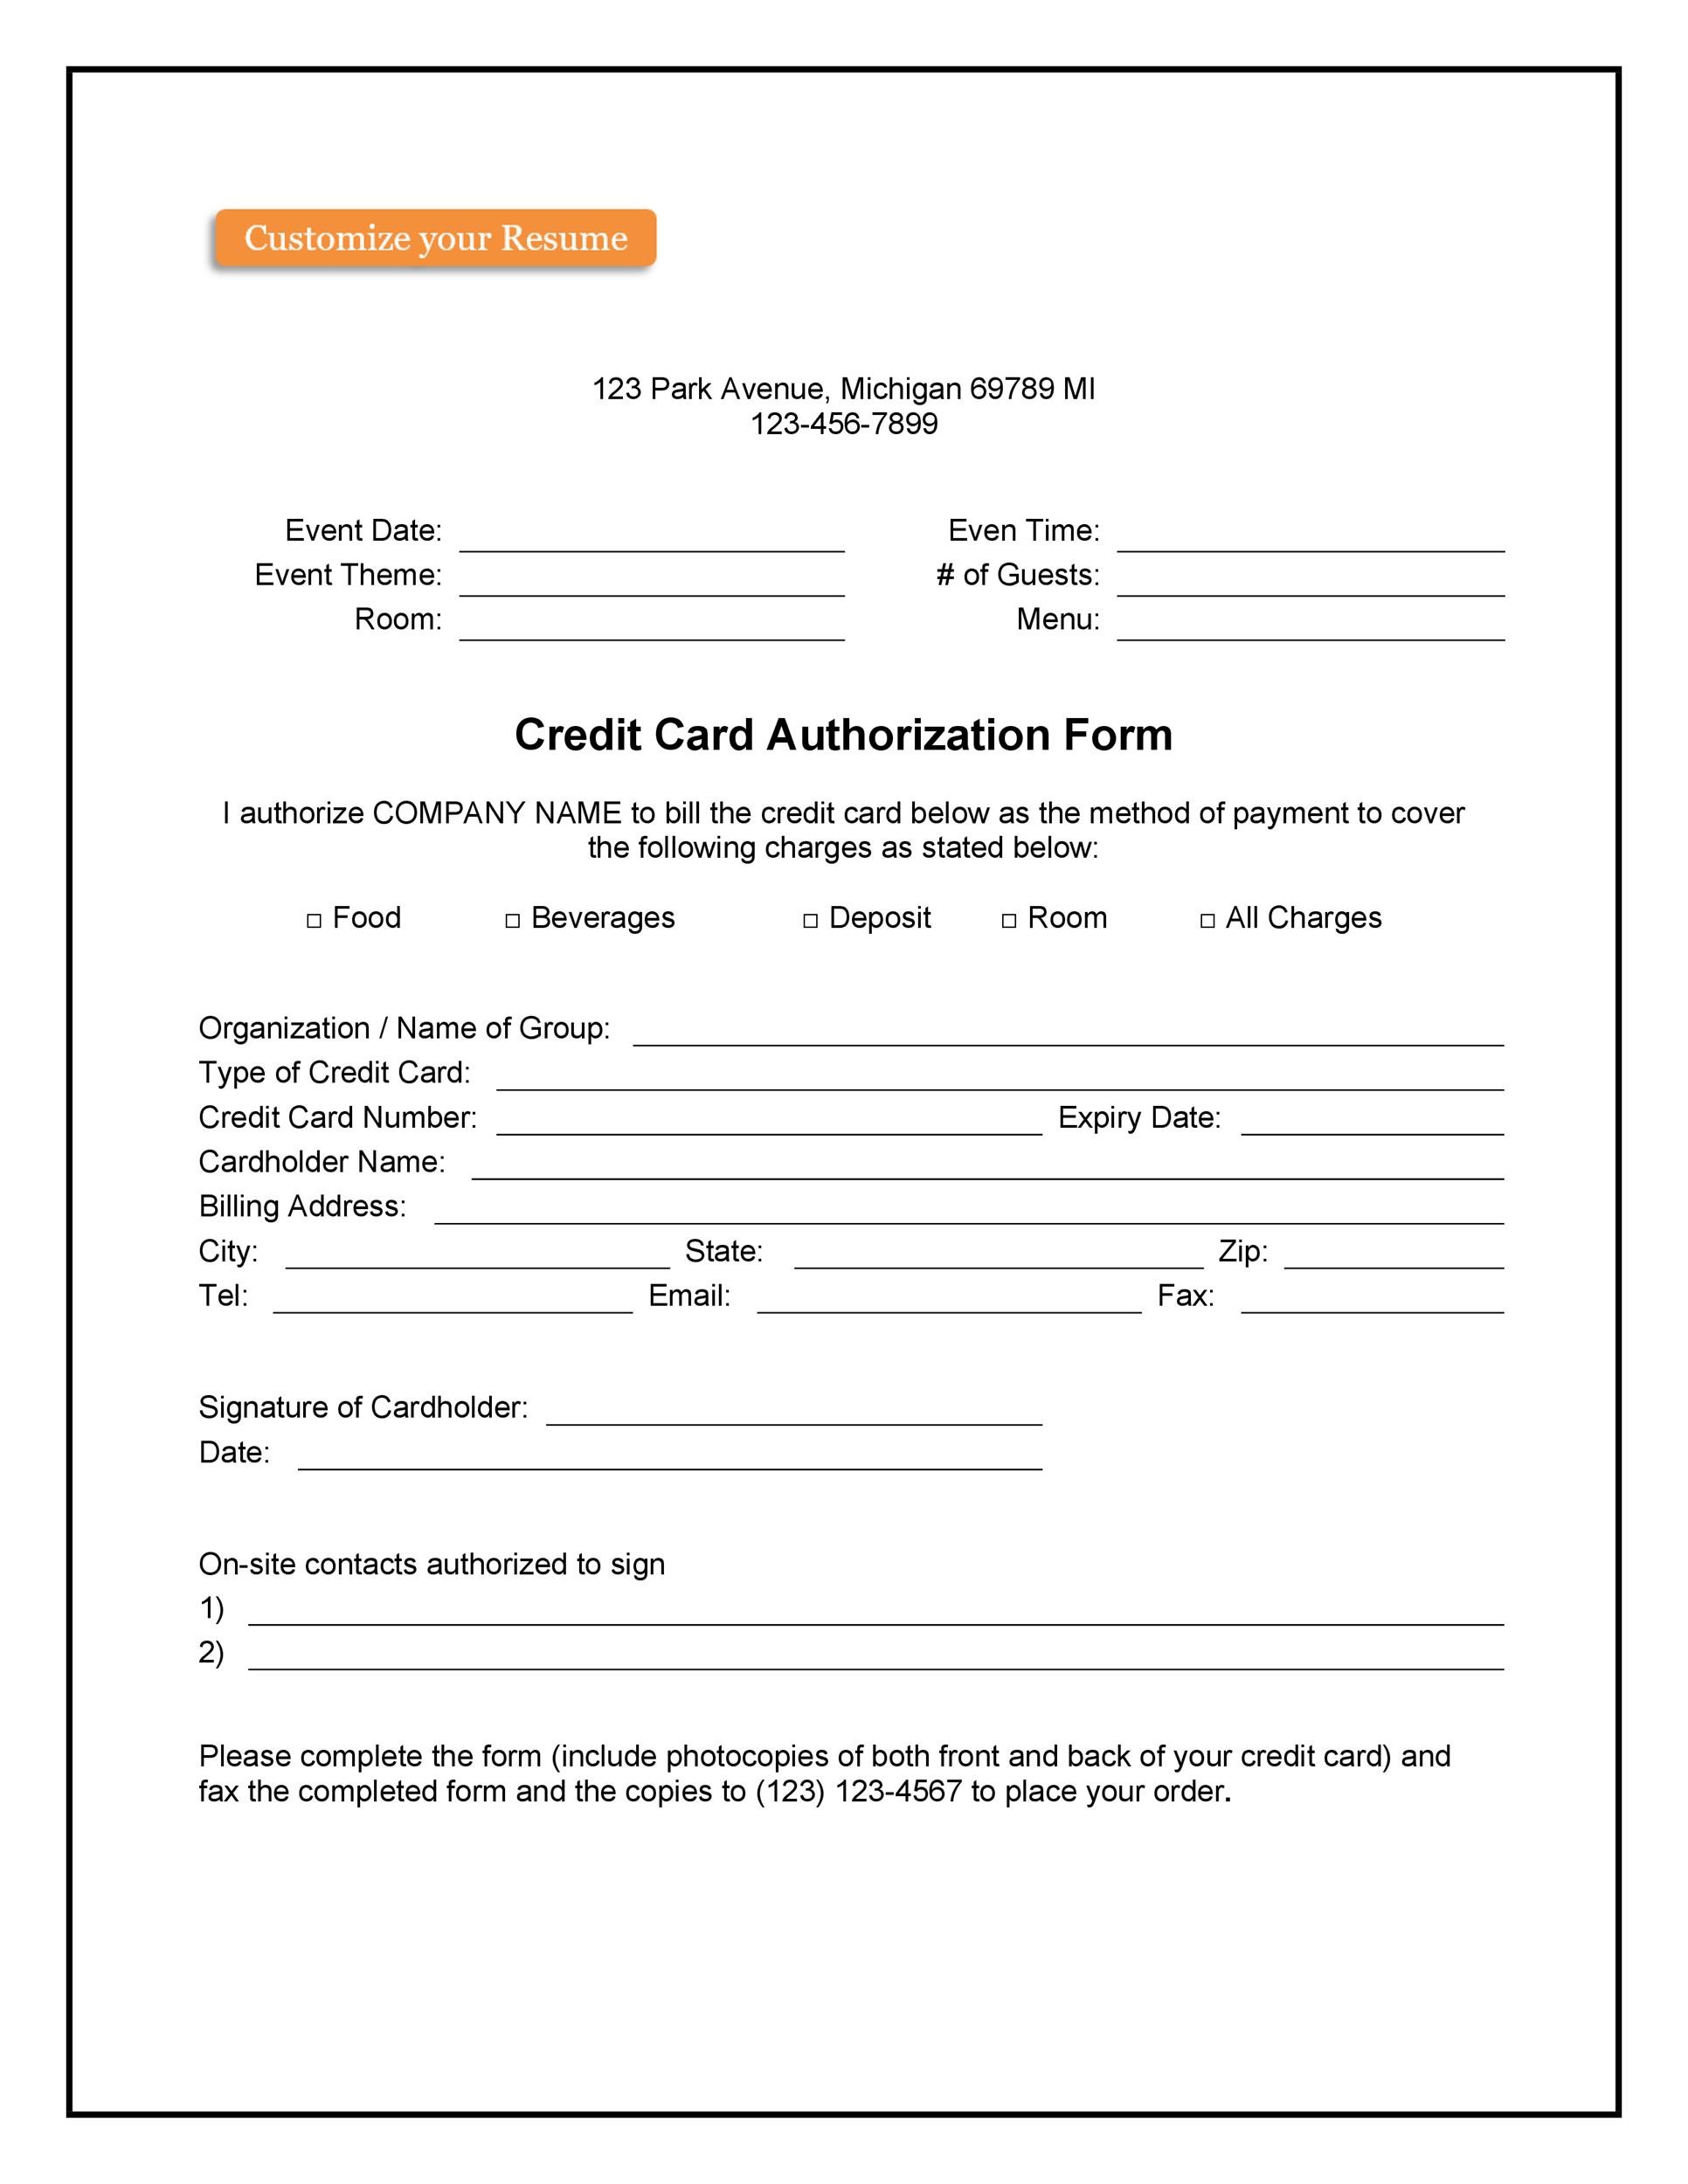 41 Credit Card Authorization Forms Templates Ready To Use 2208